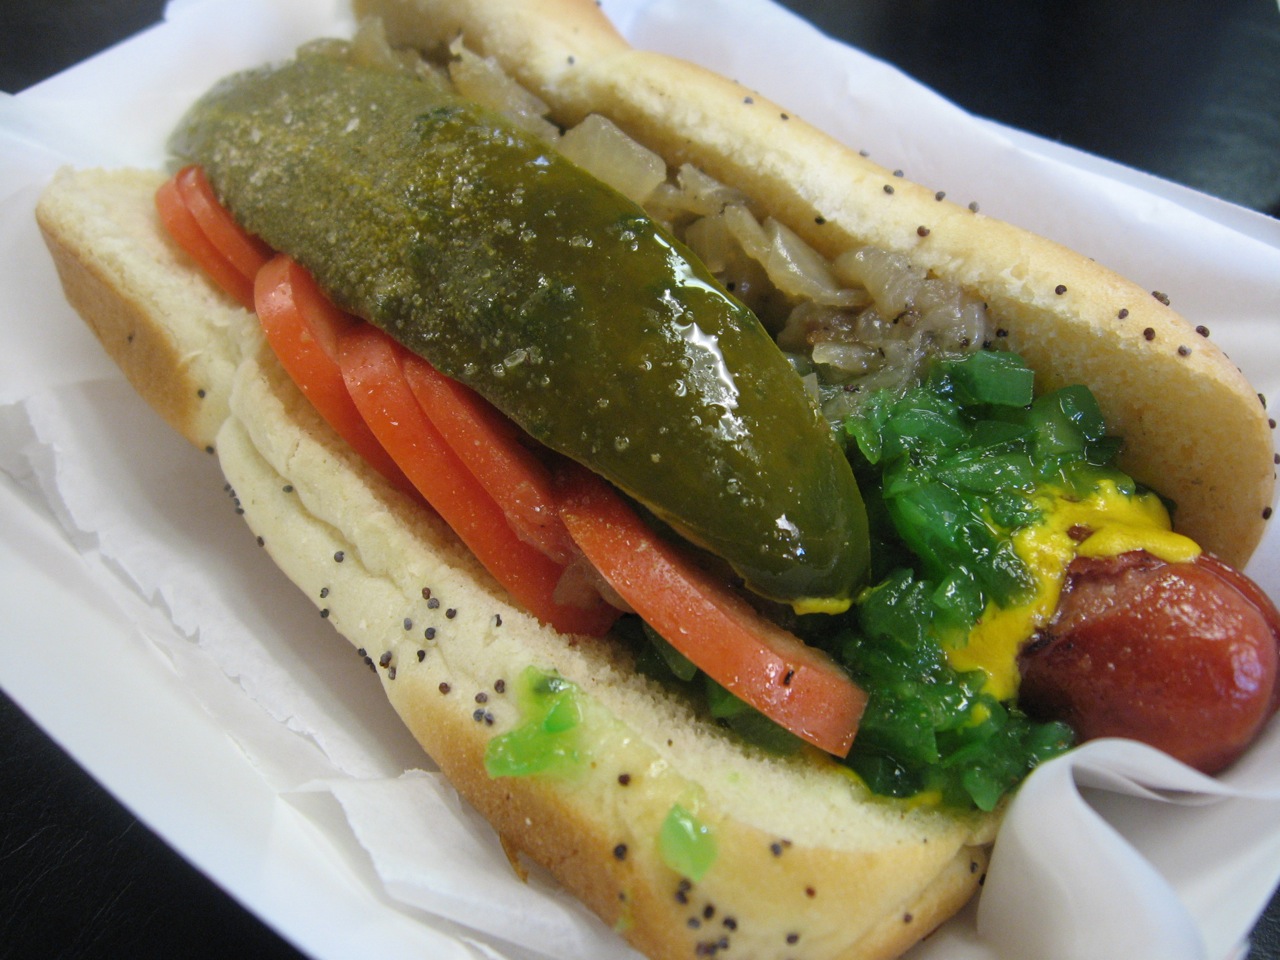 A Chicago-style hot dog, the author's preferred style.